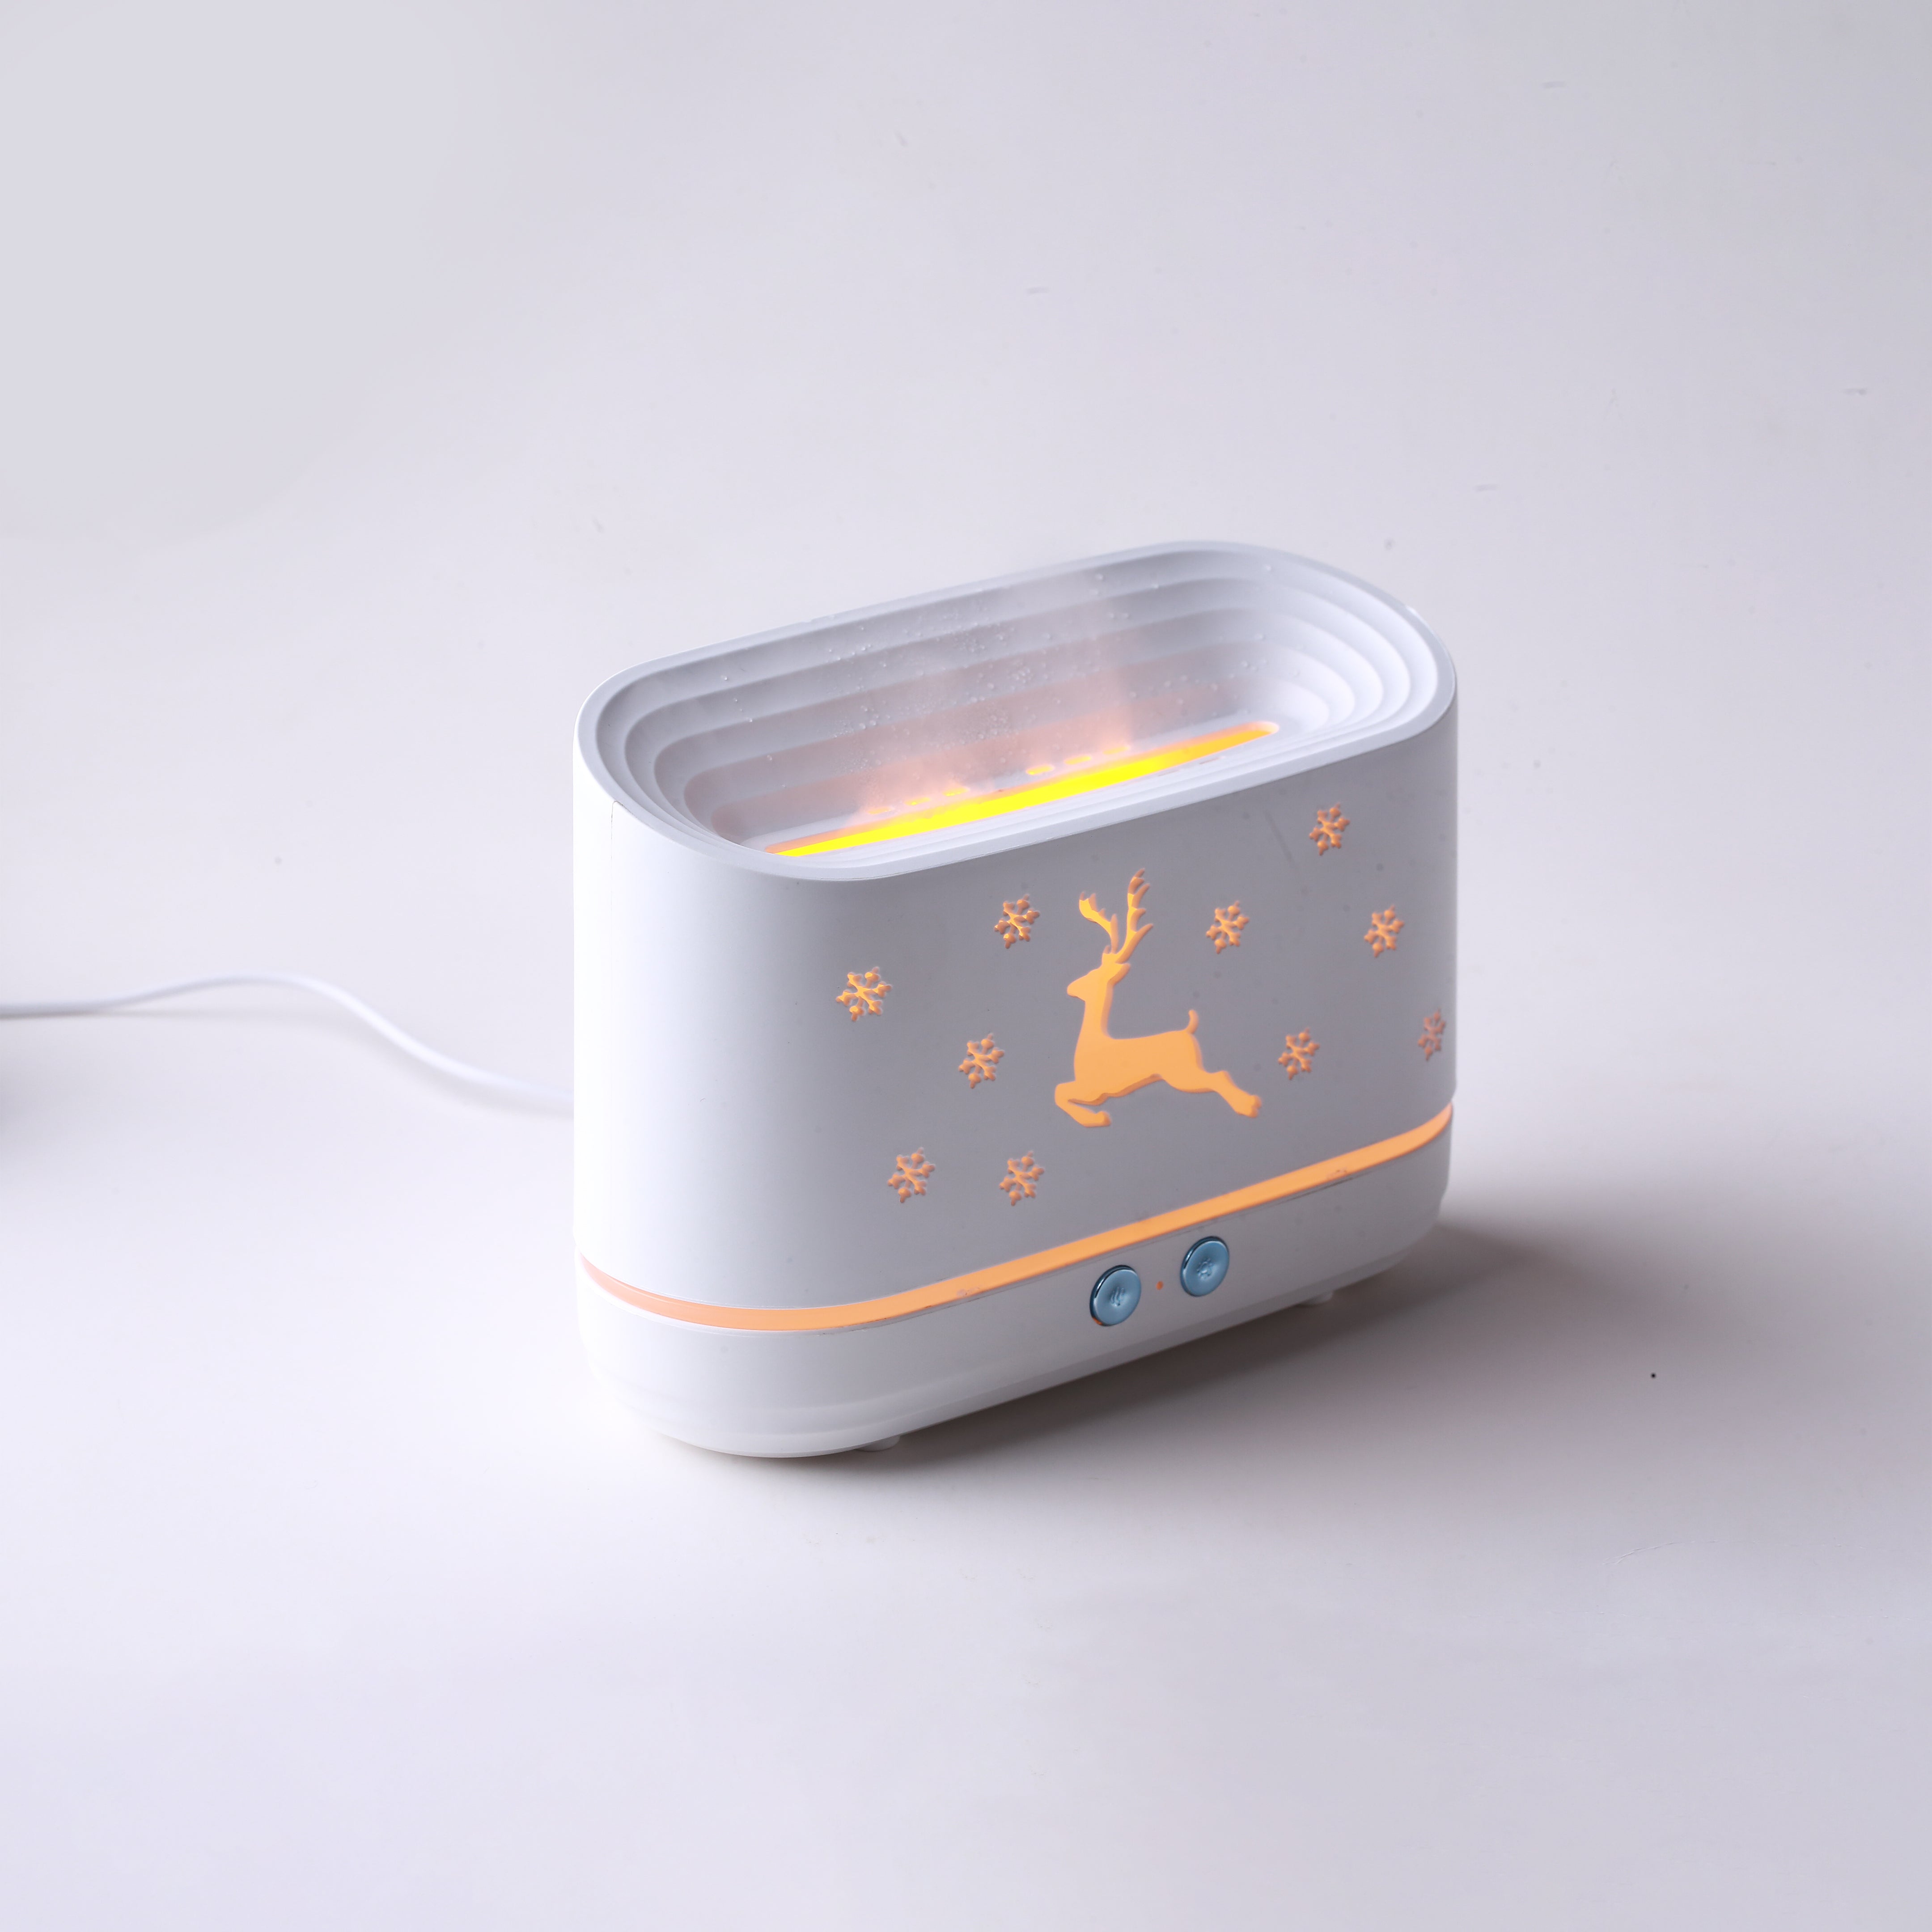 Flame Design Humidifier